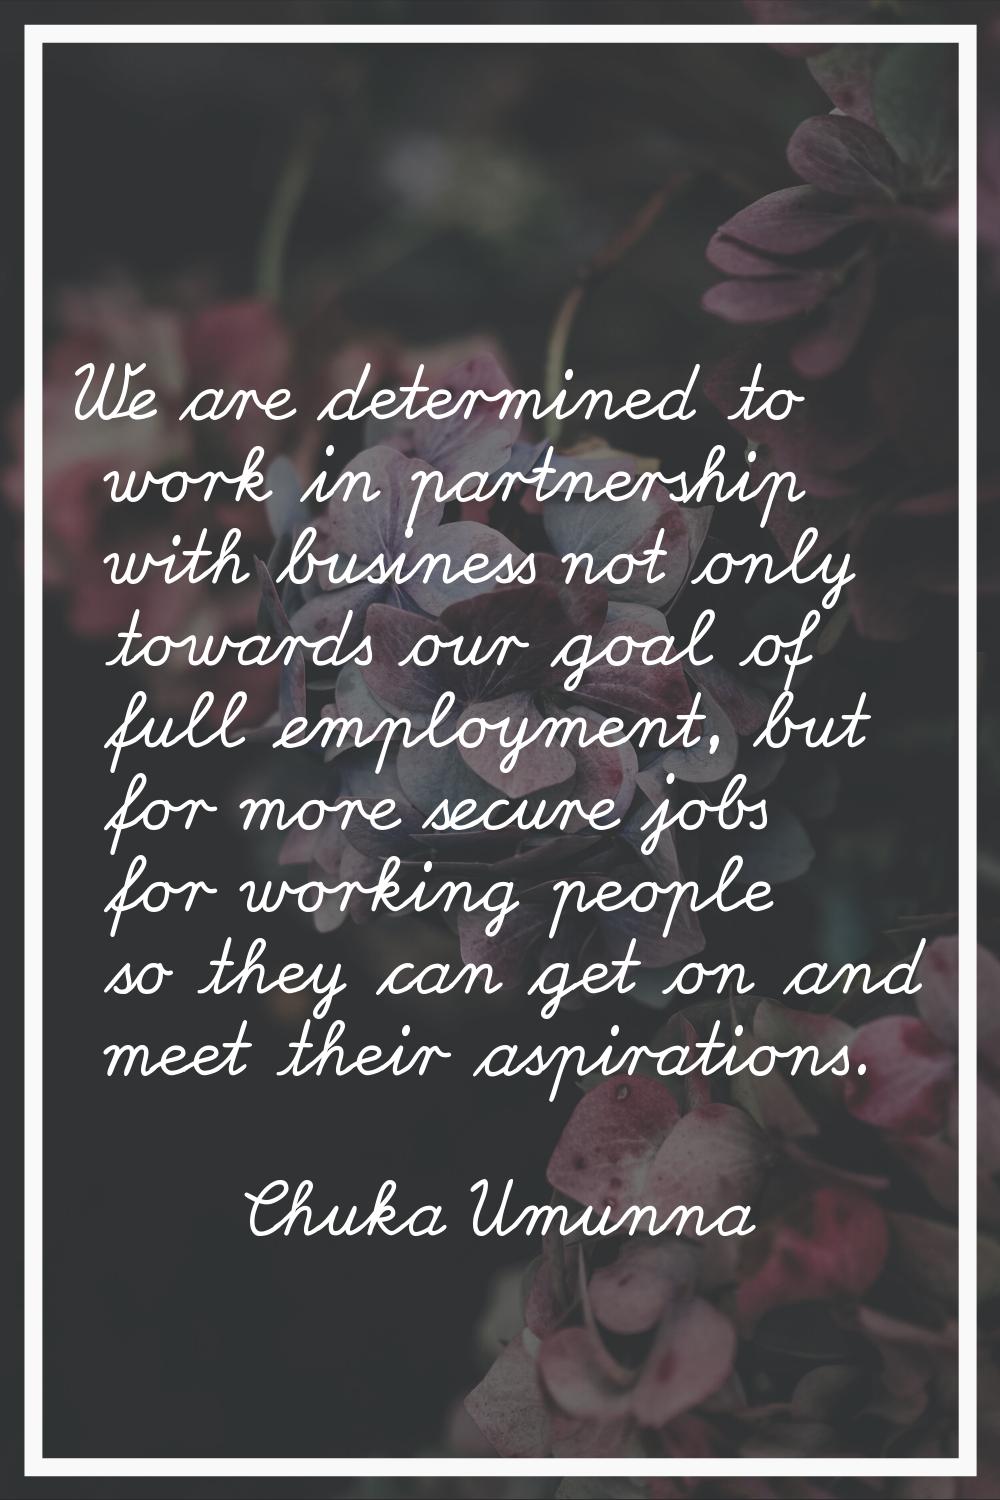 We are determined to work in partnership with business not only towards our goal of full employment